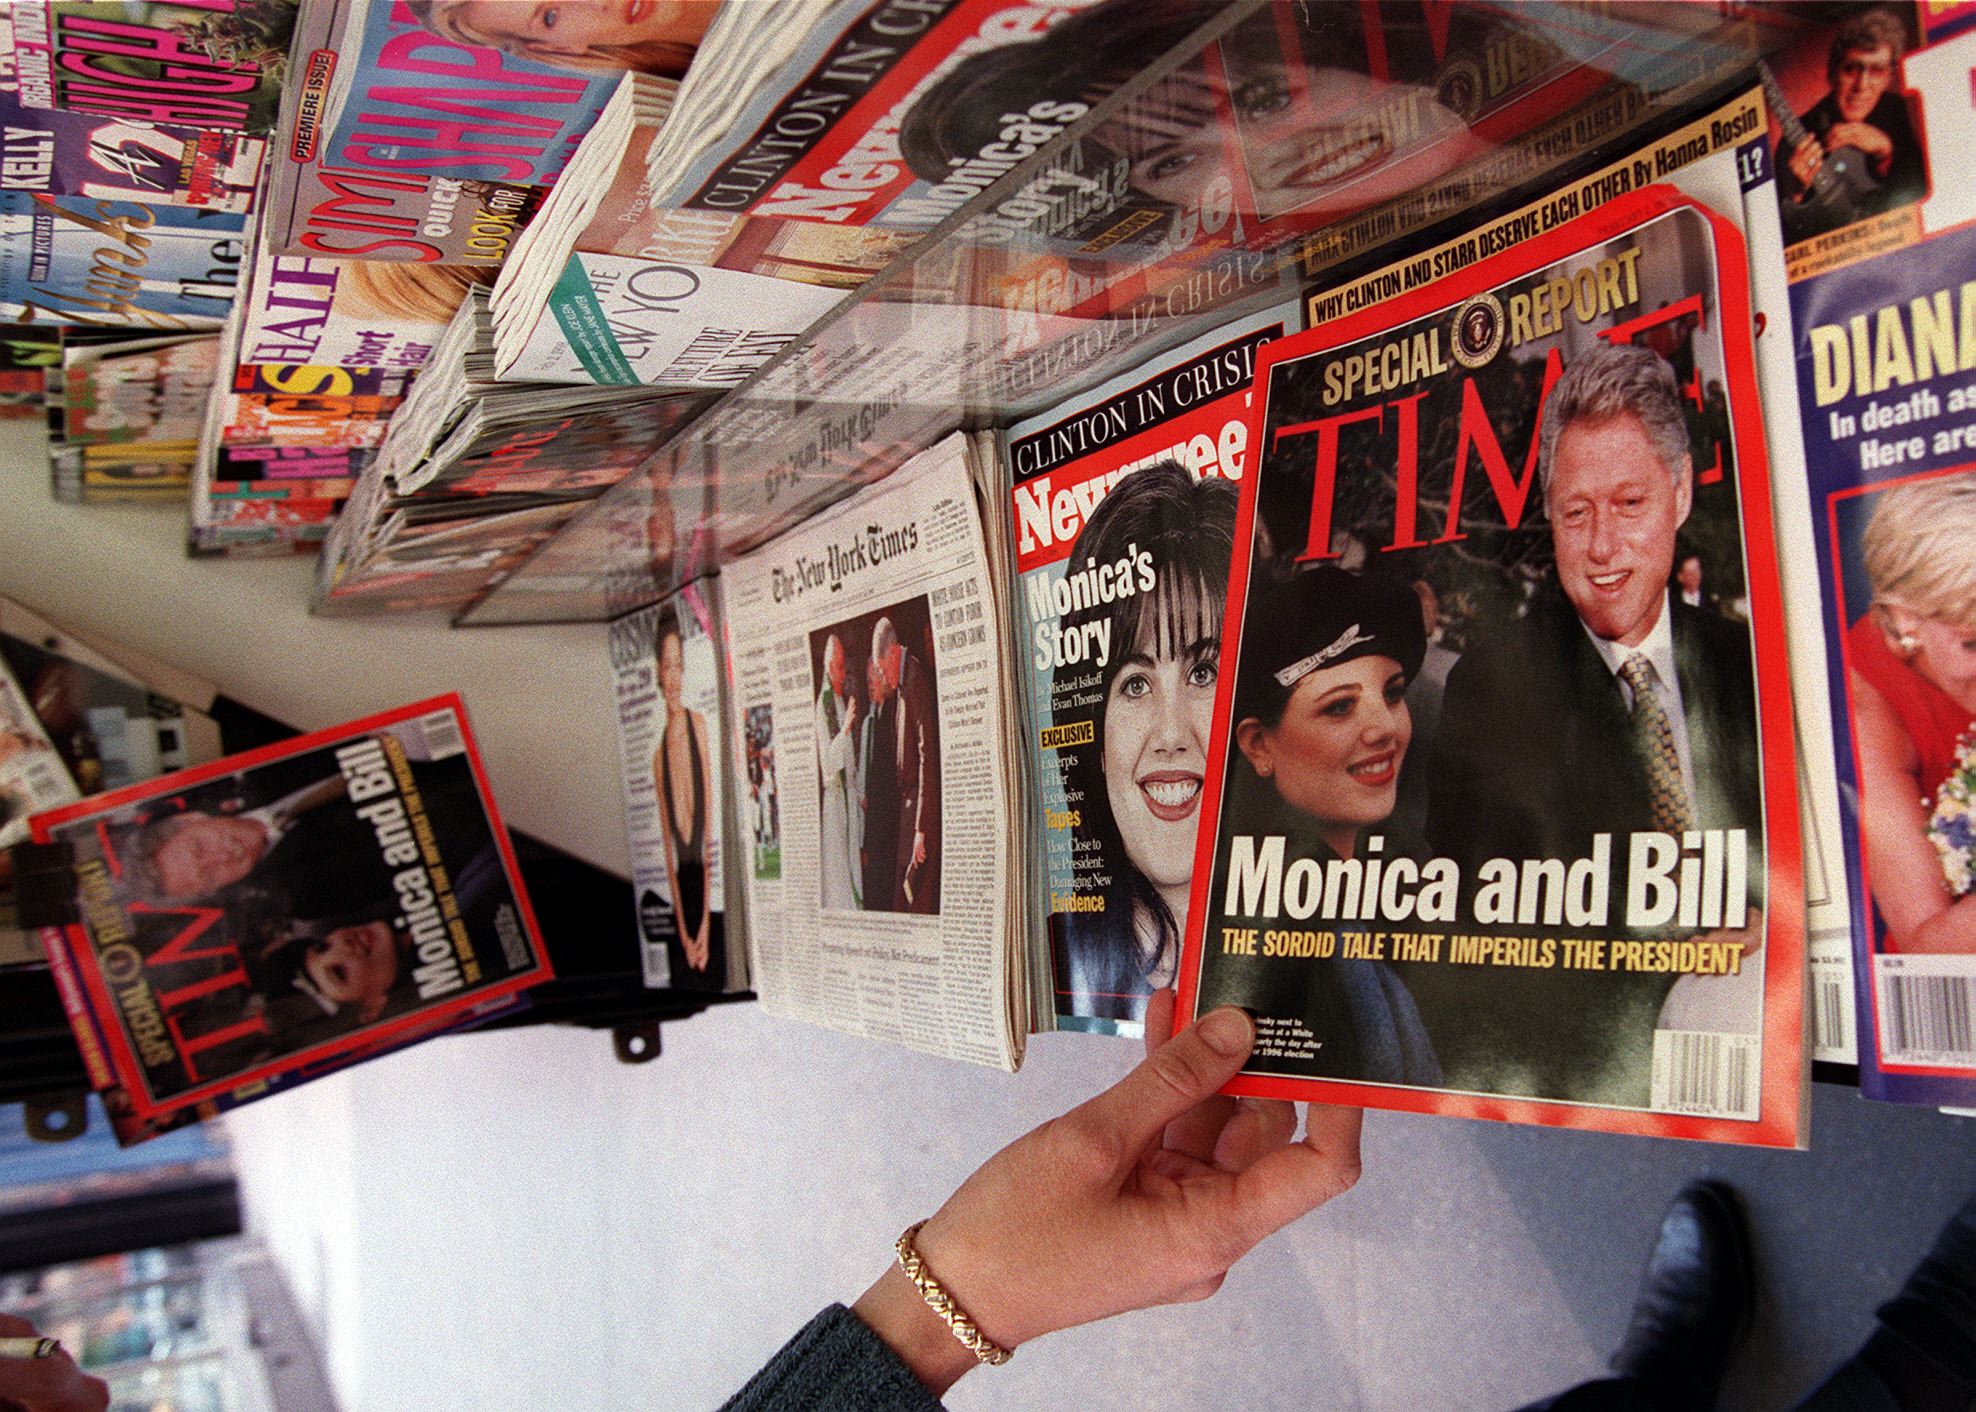 A person reaches for a copy of Time Magazine on a news stand January 26, 1998 in New York. | Source: Getty Images